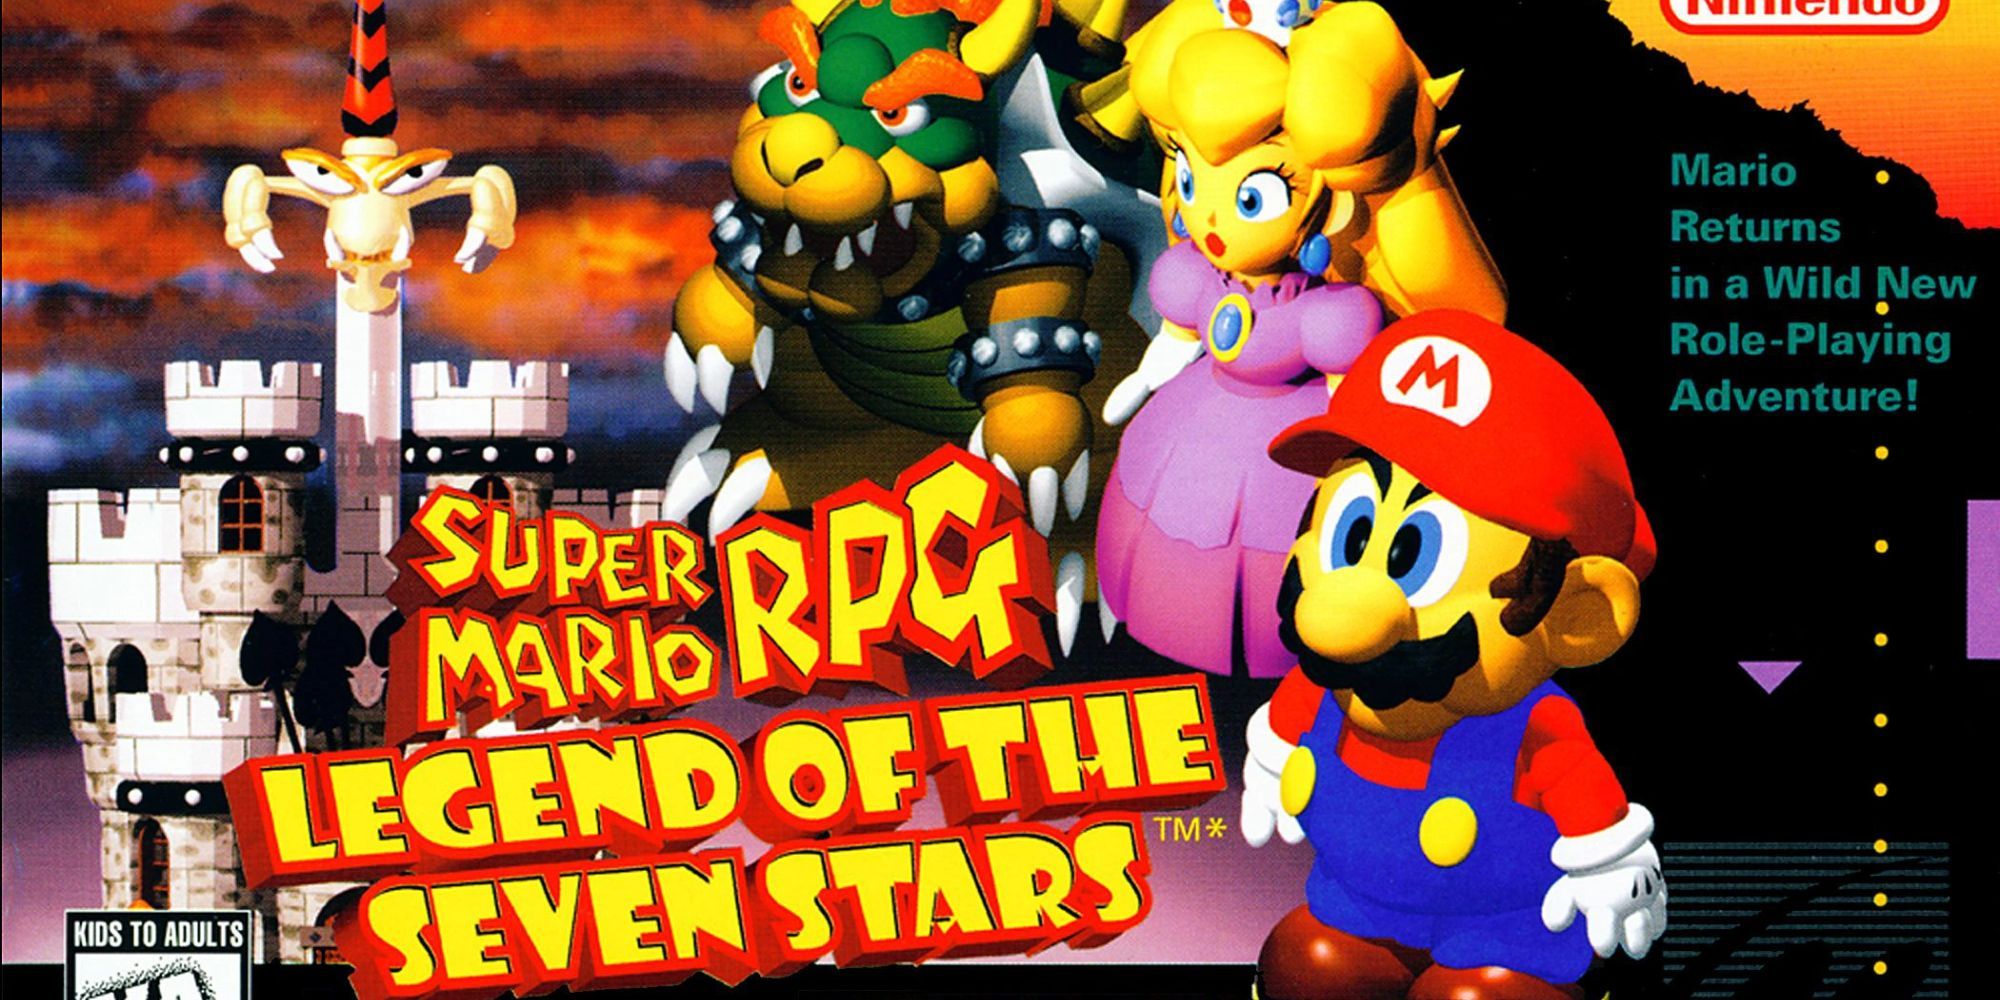 Cover art for Super Mario Legend of the Seven Stars with Mario, Princess Peach, and Bowser for the SNES